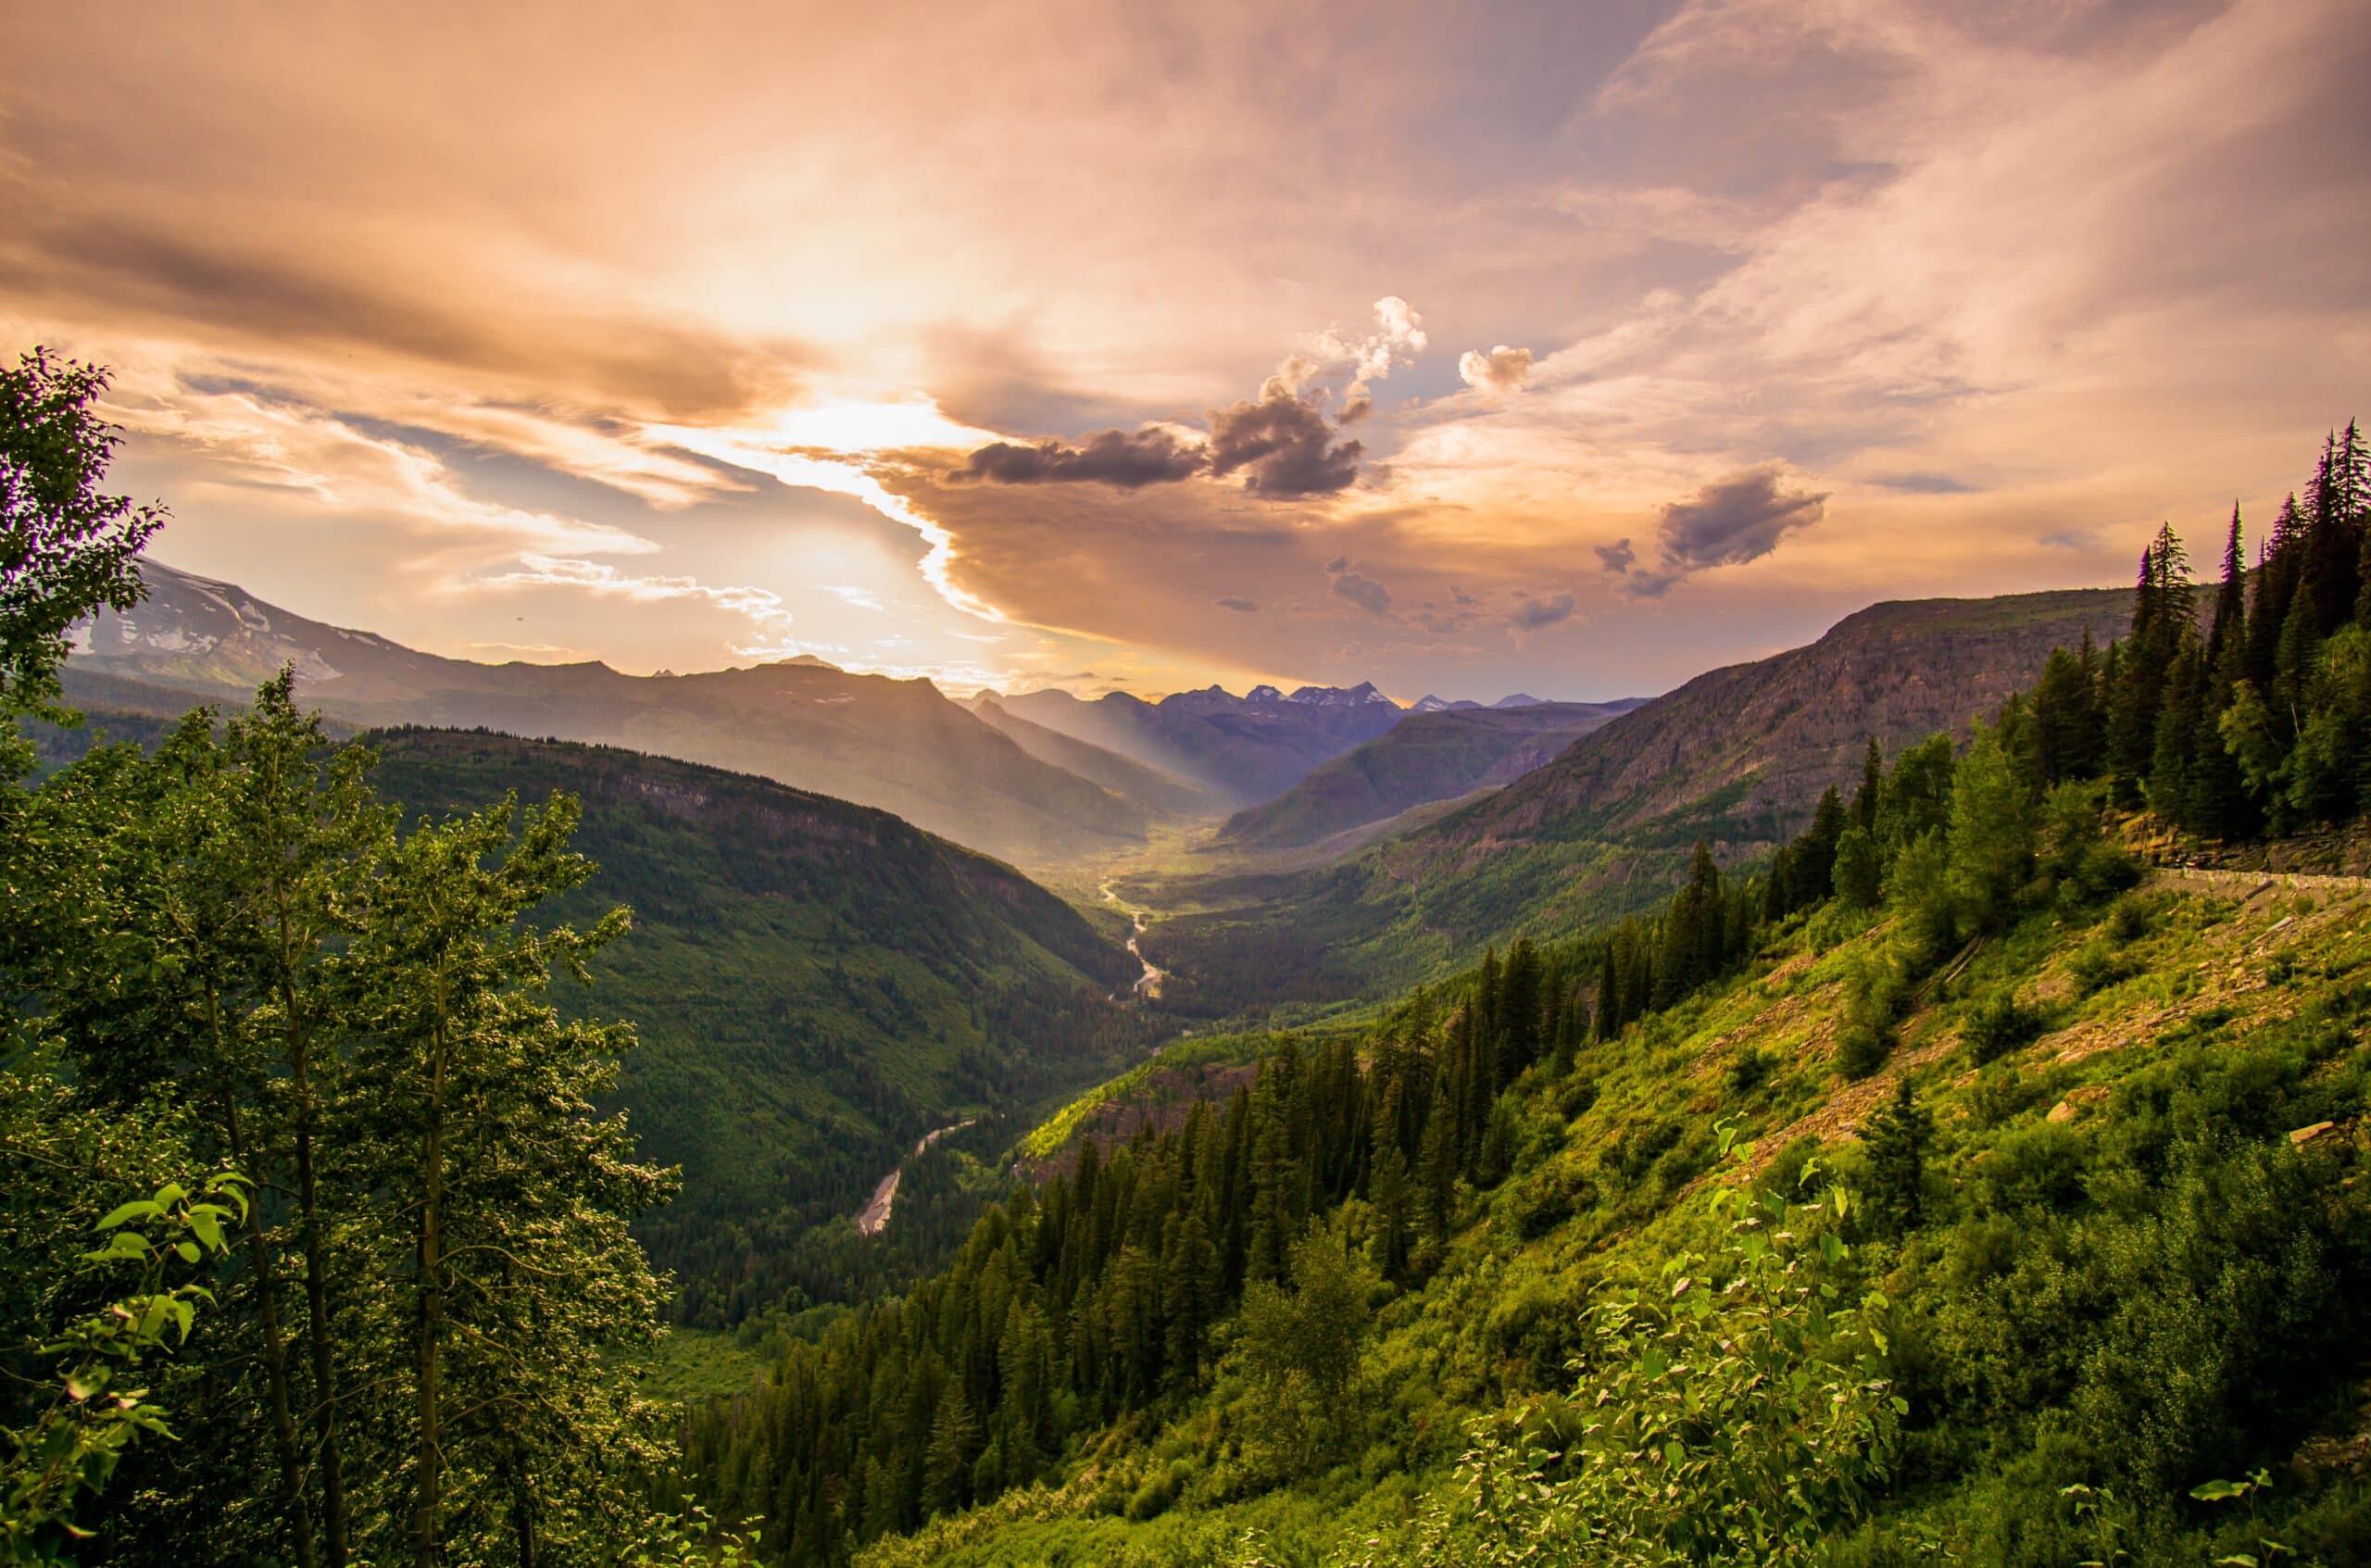 A scenic portrait of lush Montana nature. There are large mountains peppered with trees and a river tucked in a canyon